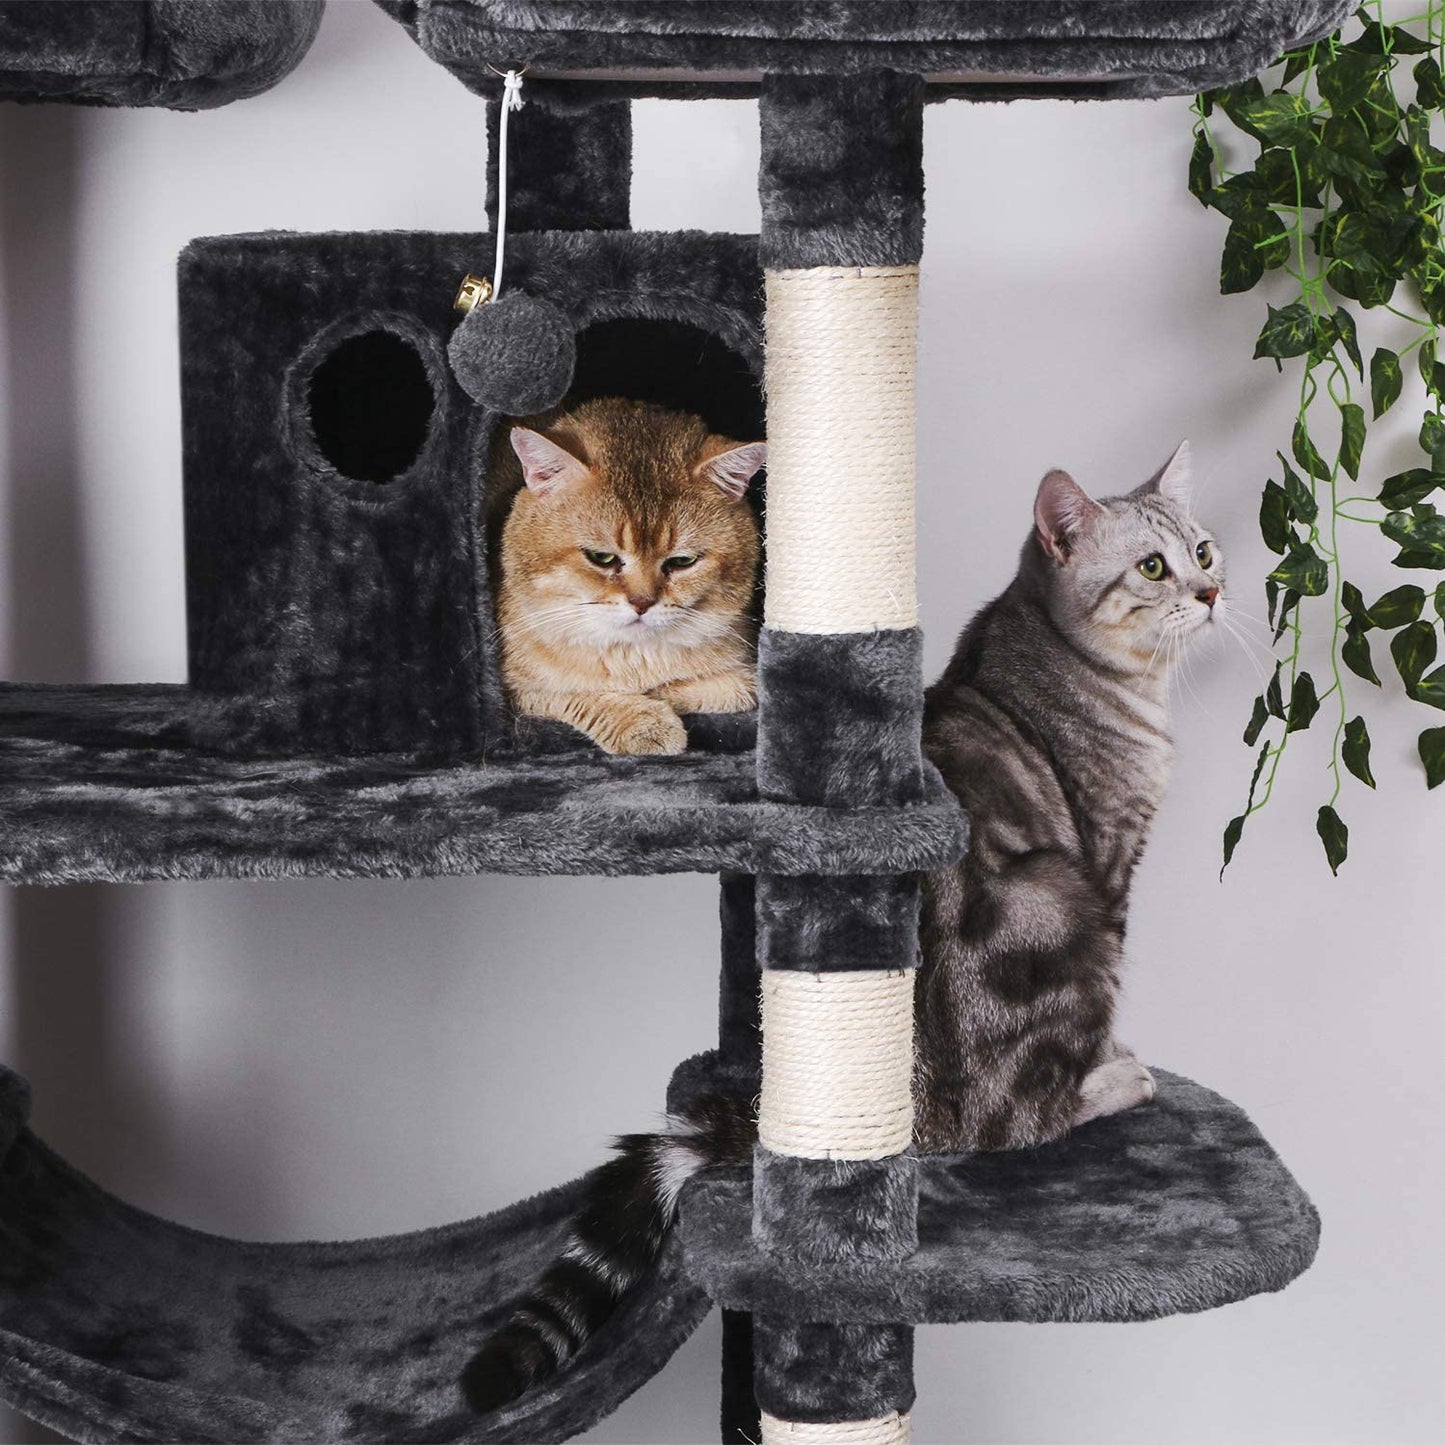 Large Cat Tree Condo with Sisal Scratching Posts Perches Houses Hammock, Cat Tower for Indoor Cats Furniture Kitty Activity Center Kitten Play House Grey MMJ03B